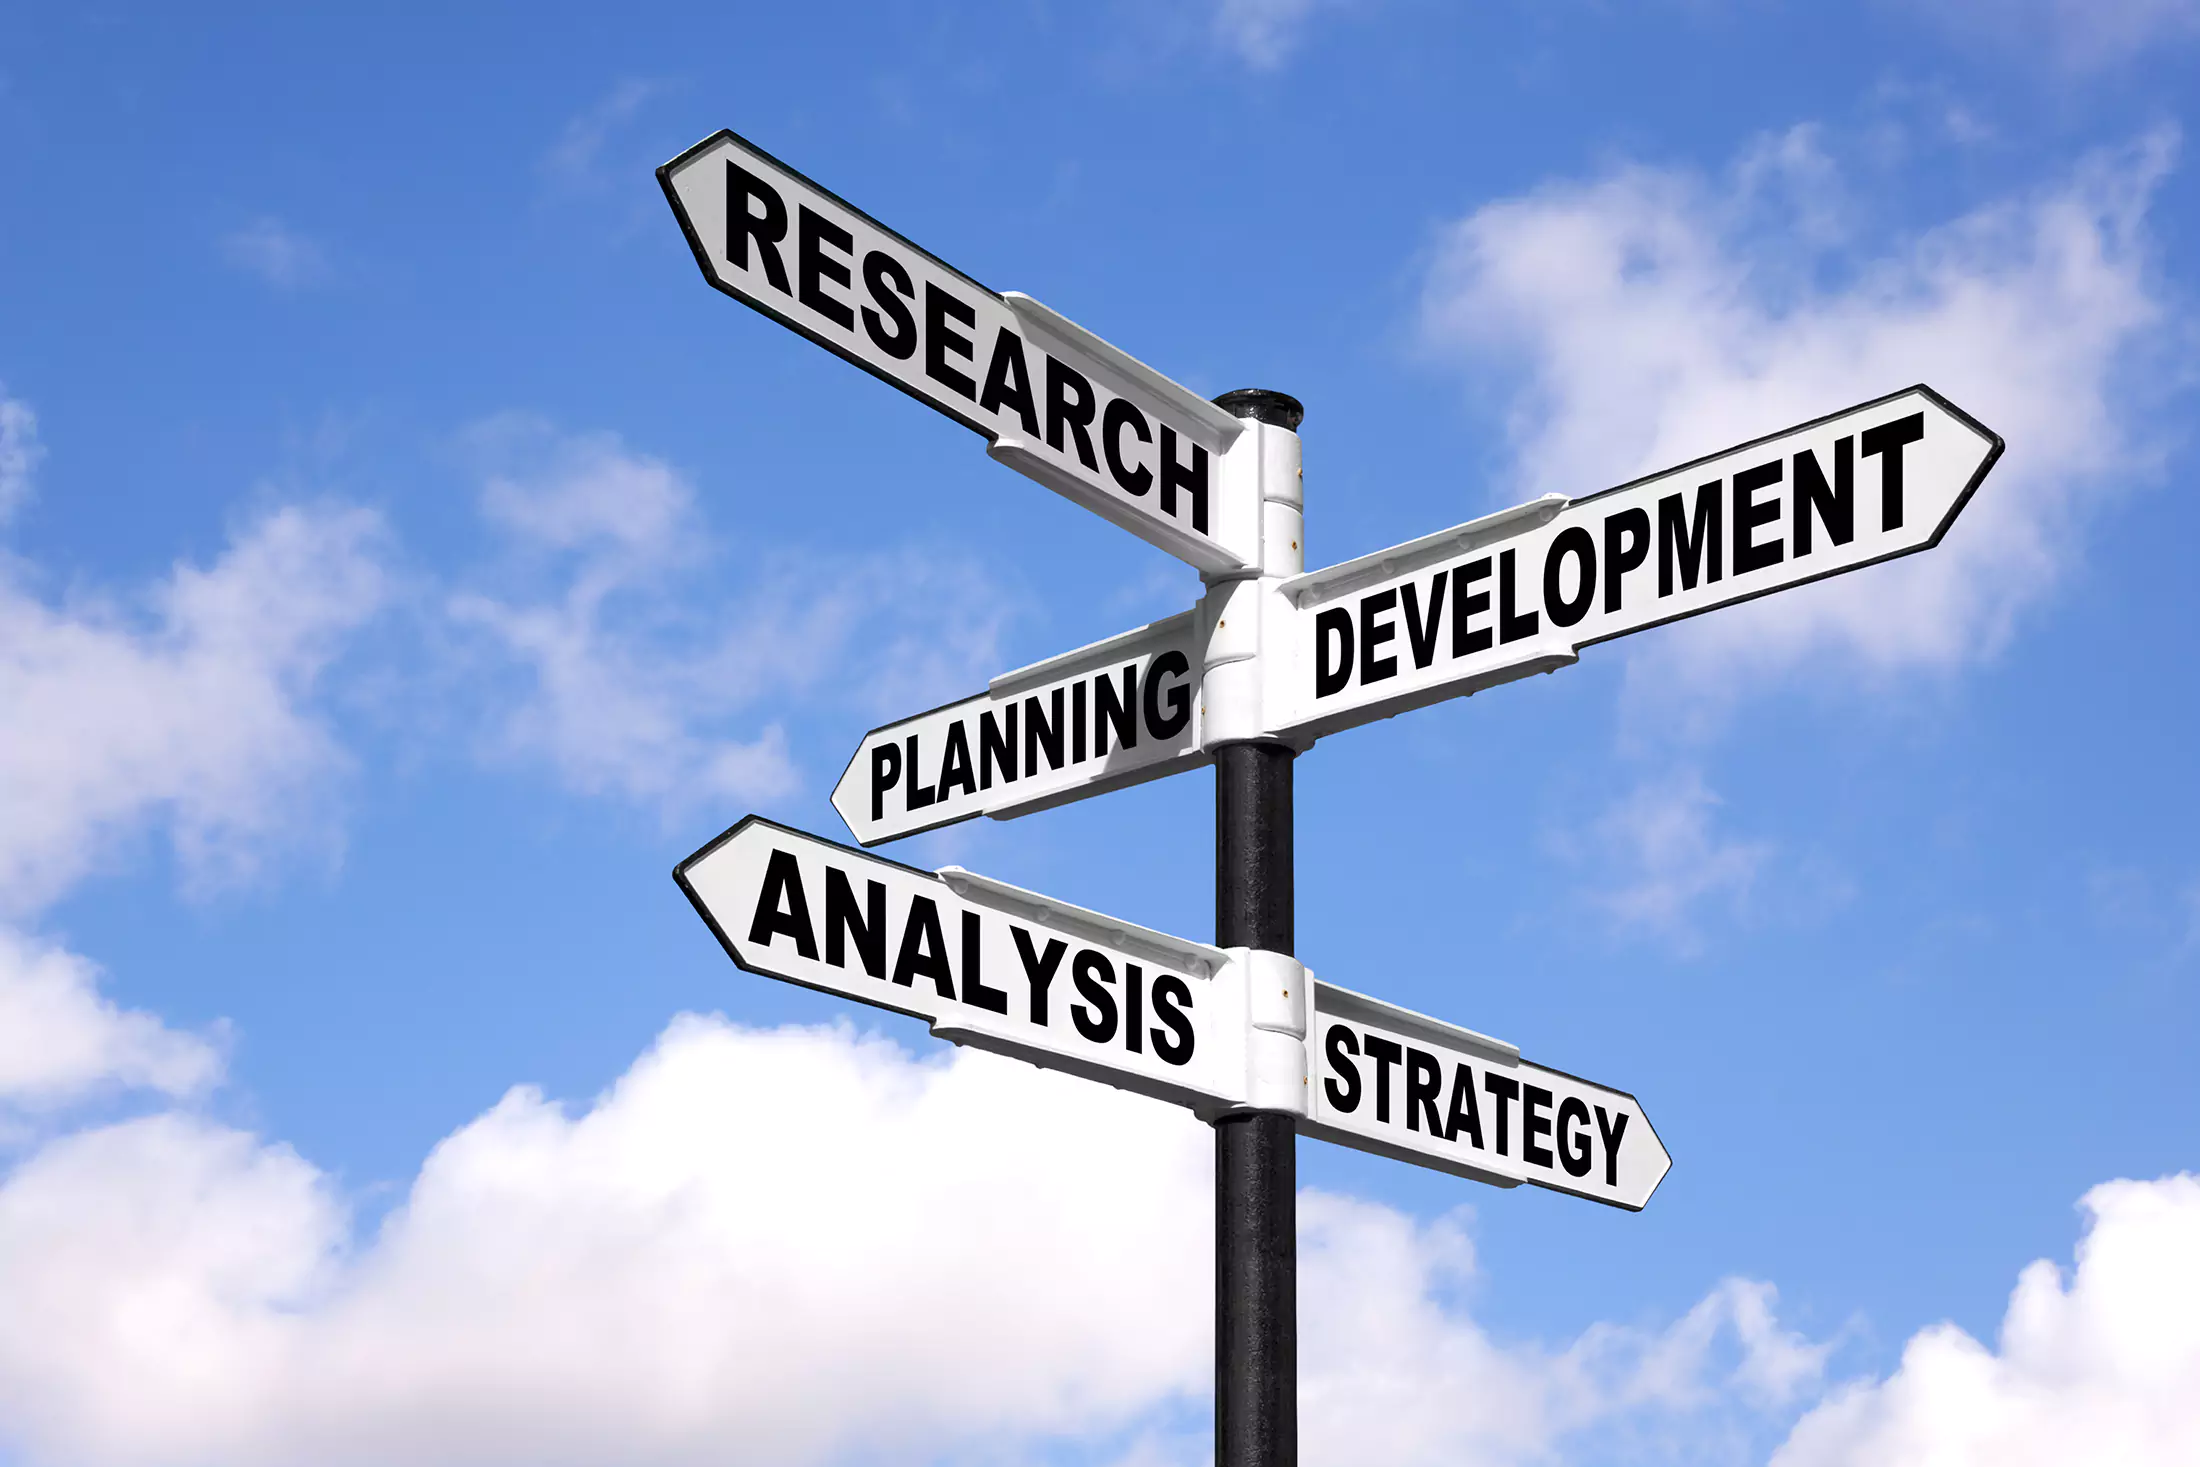 Sign post showing R&D, Analysis, and Strategy